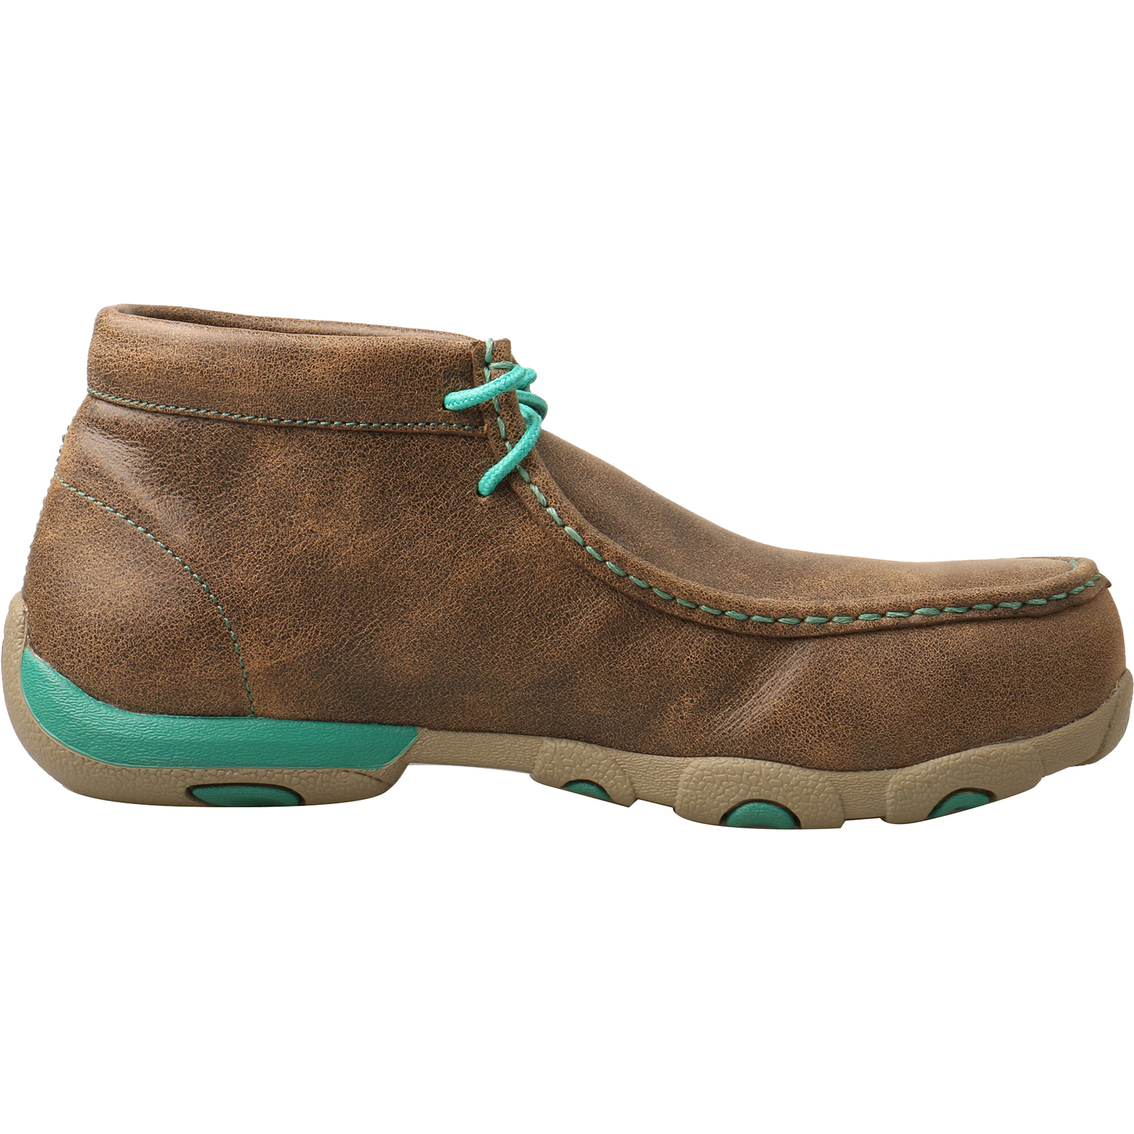 Twisted X Women's Work Alloy Toe Chukka Driving Moc Shoes - Image 2 of 6